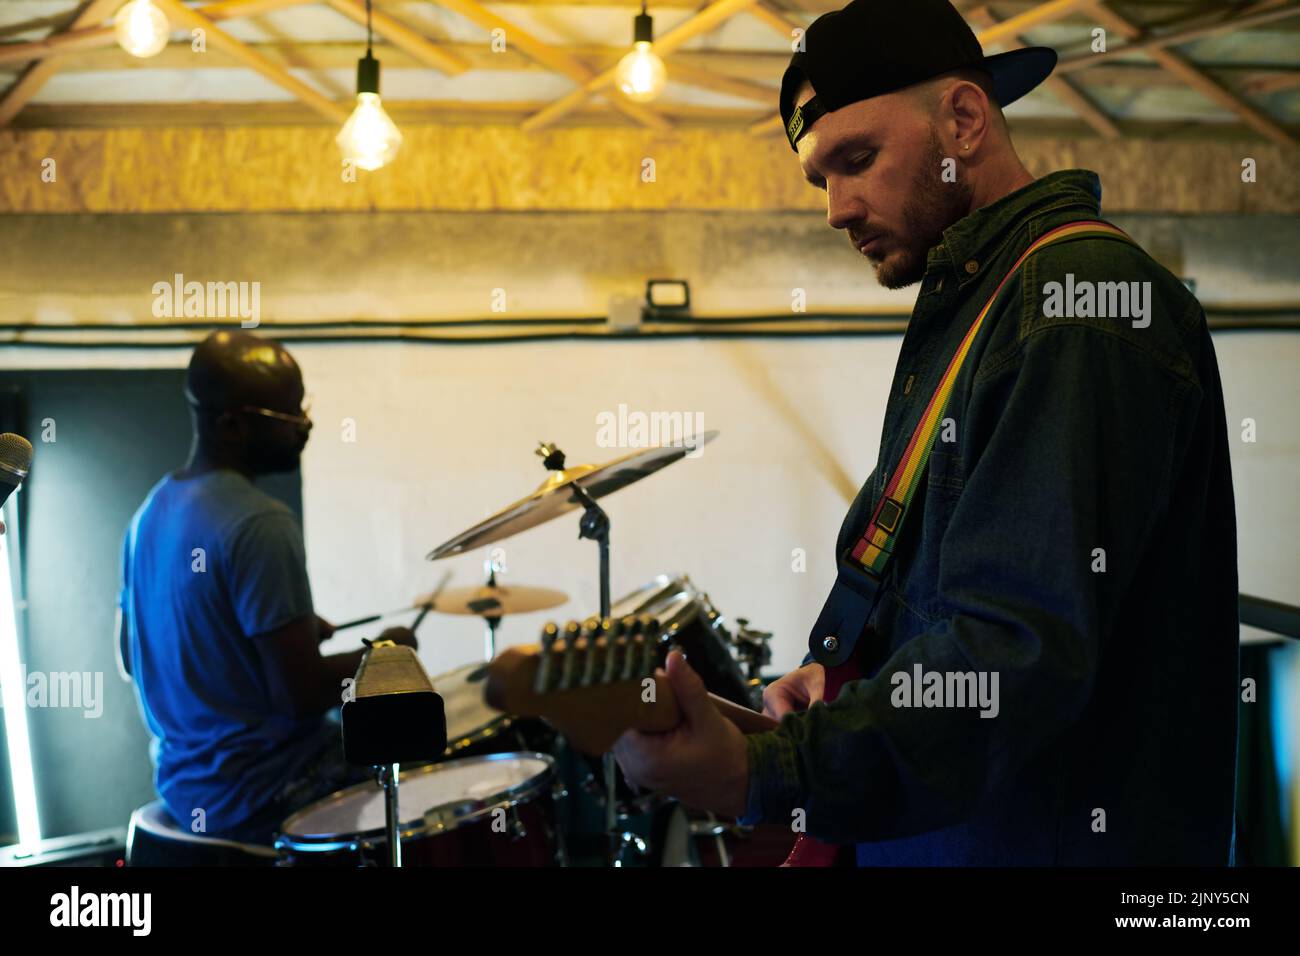 Young man playing electric guitar while standing in front of camera against African American guy hitting cymbals and drums Stock Photo